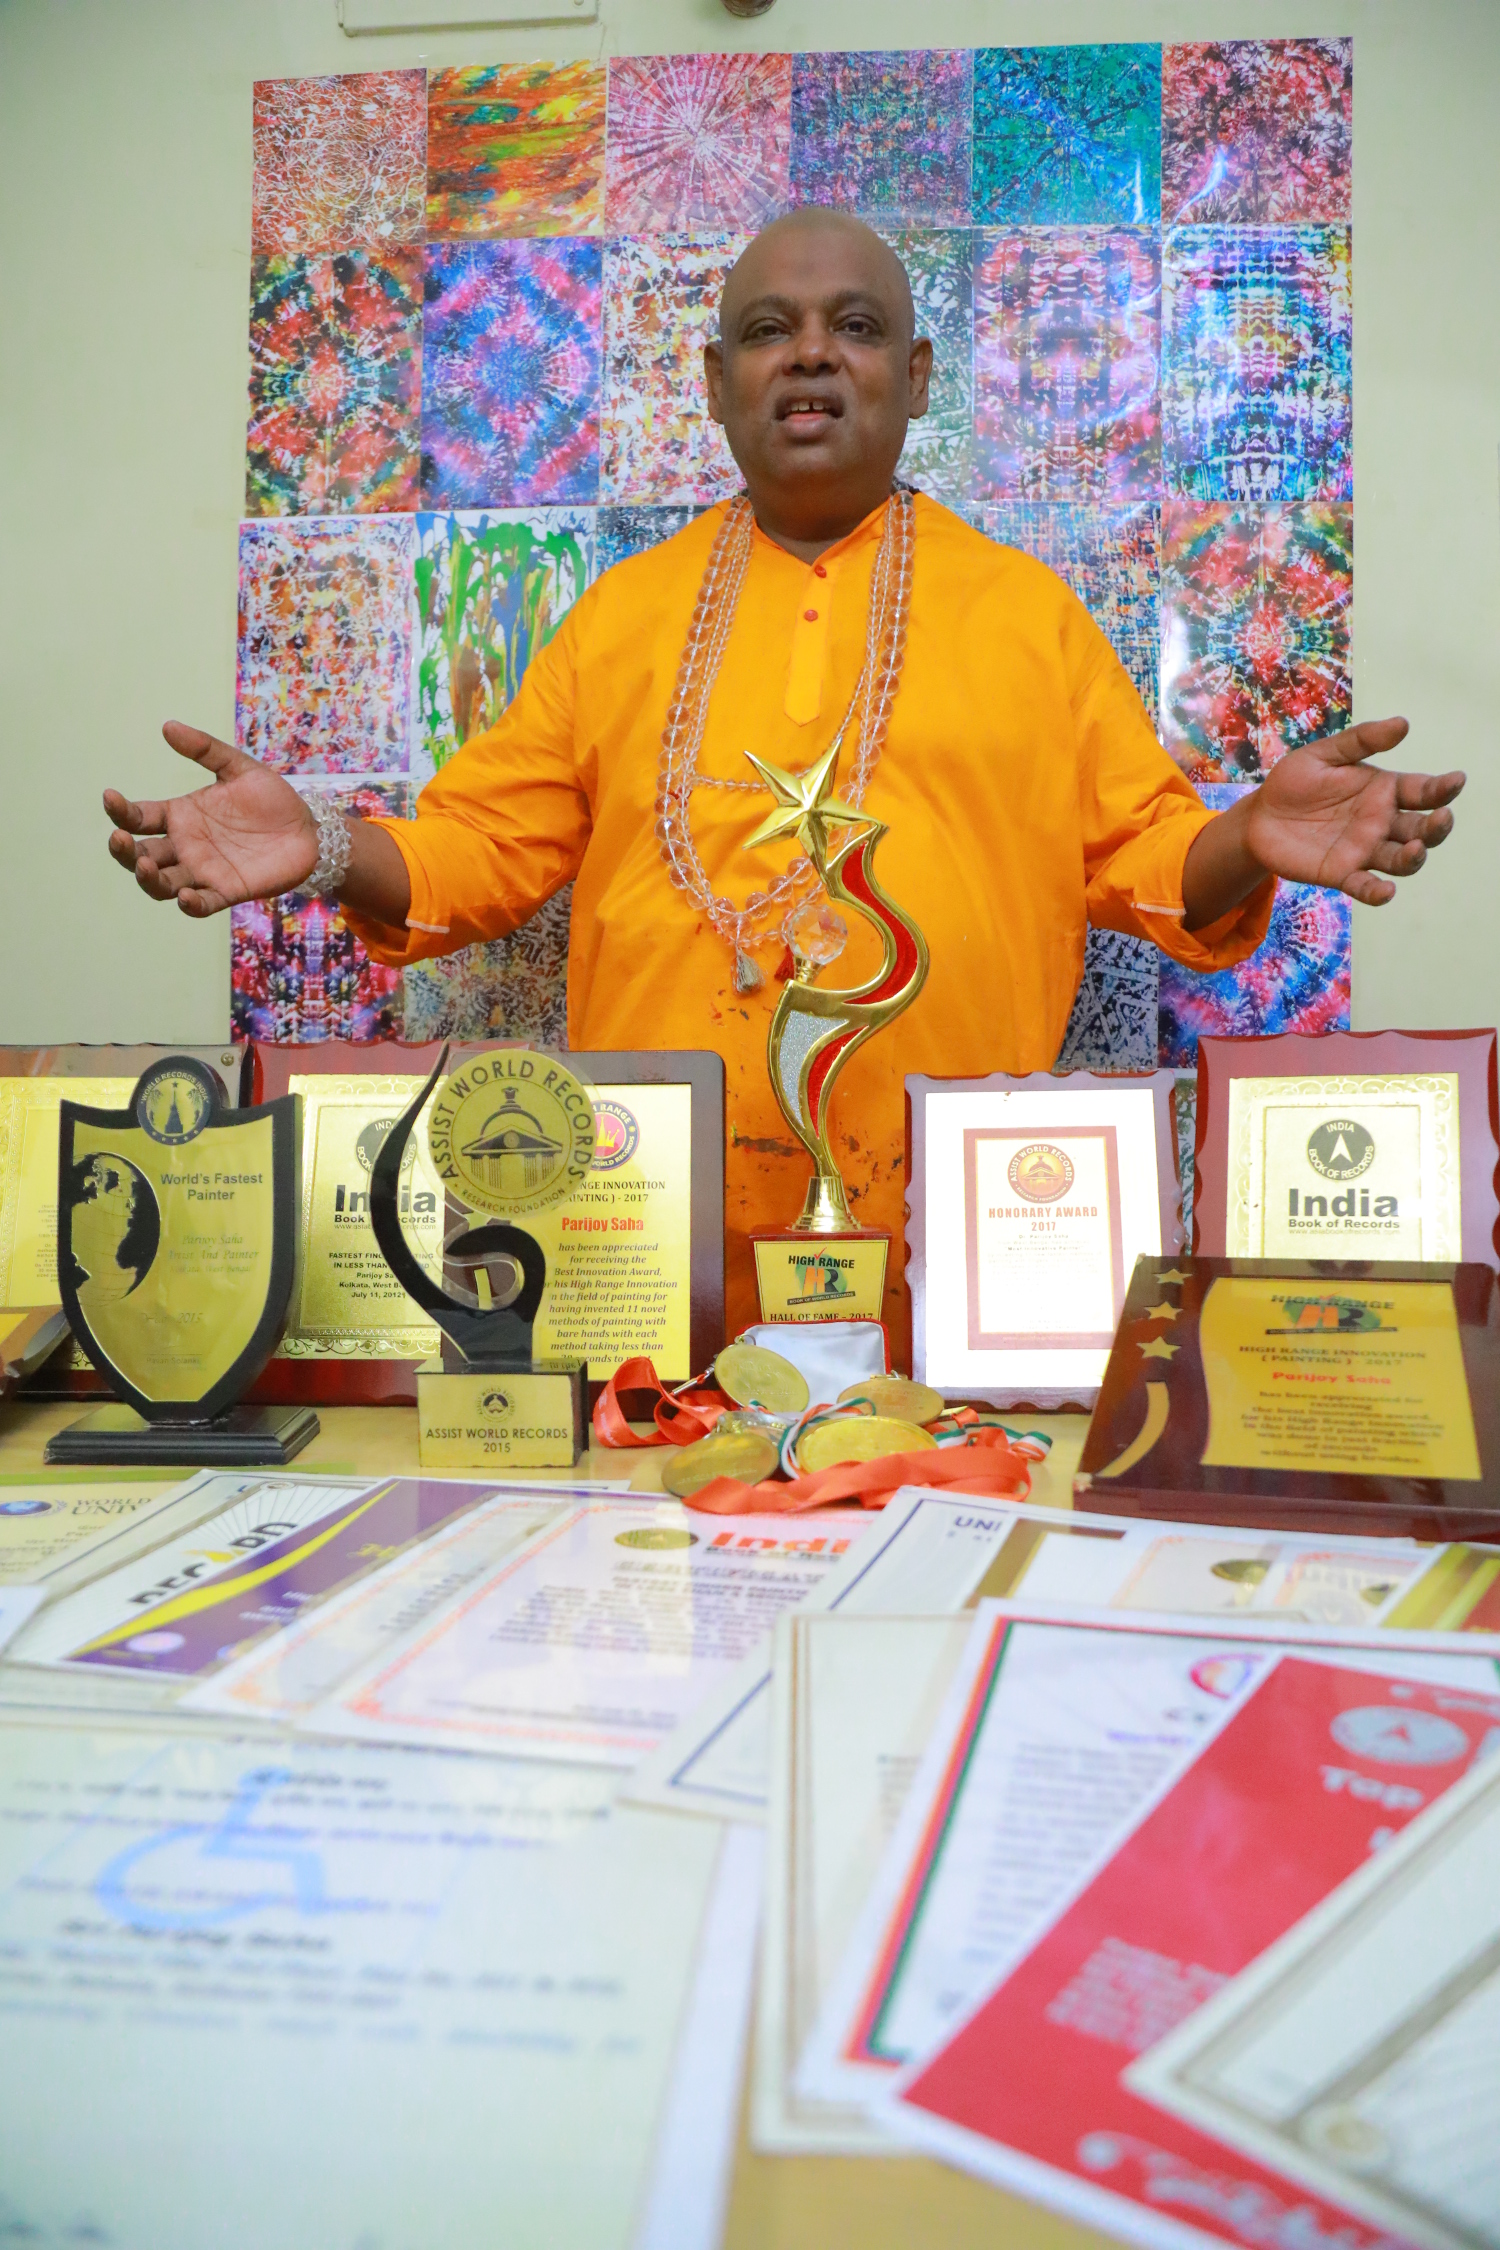 Parijoy Saha with his world record certificates and awards.